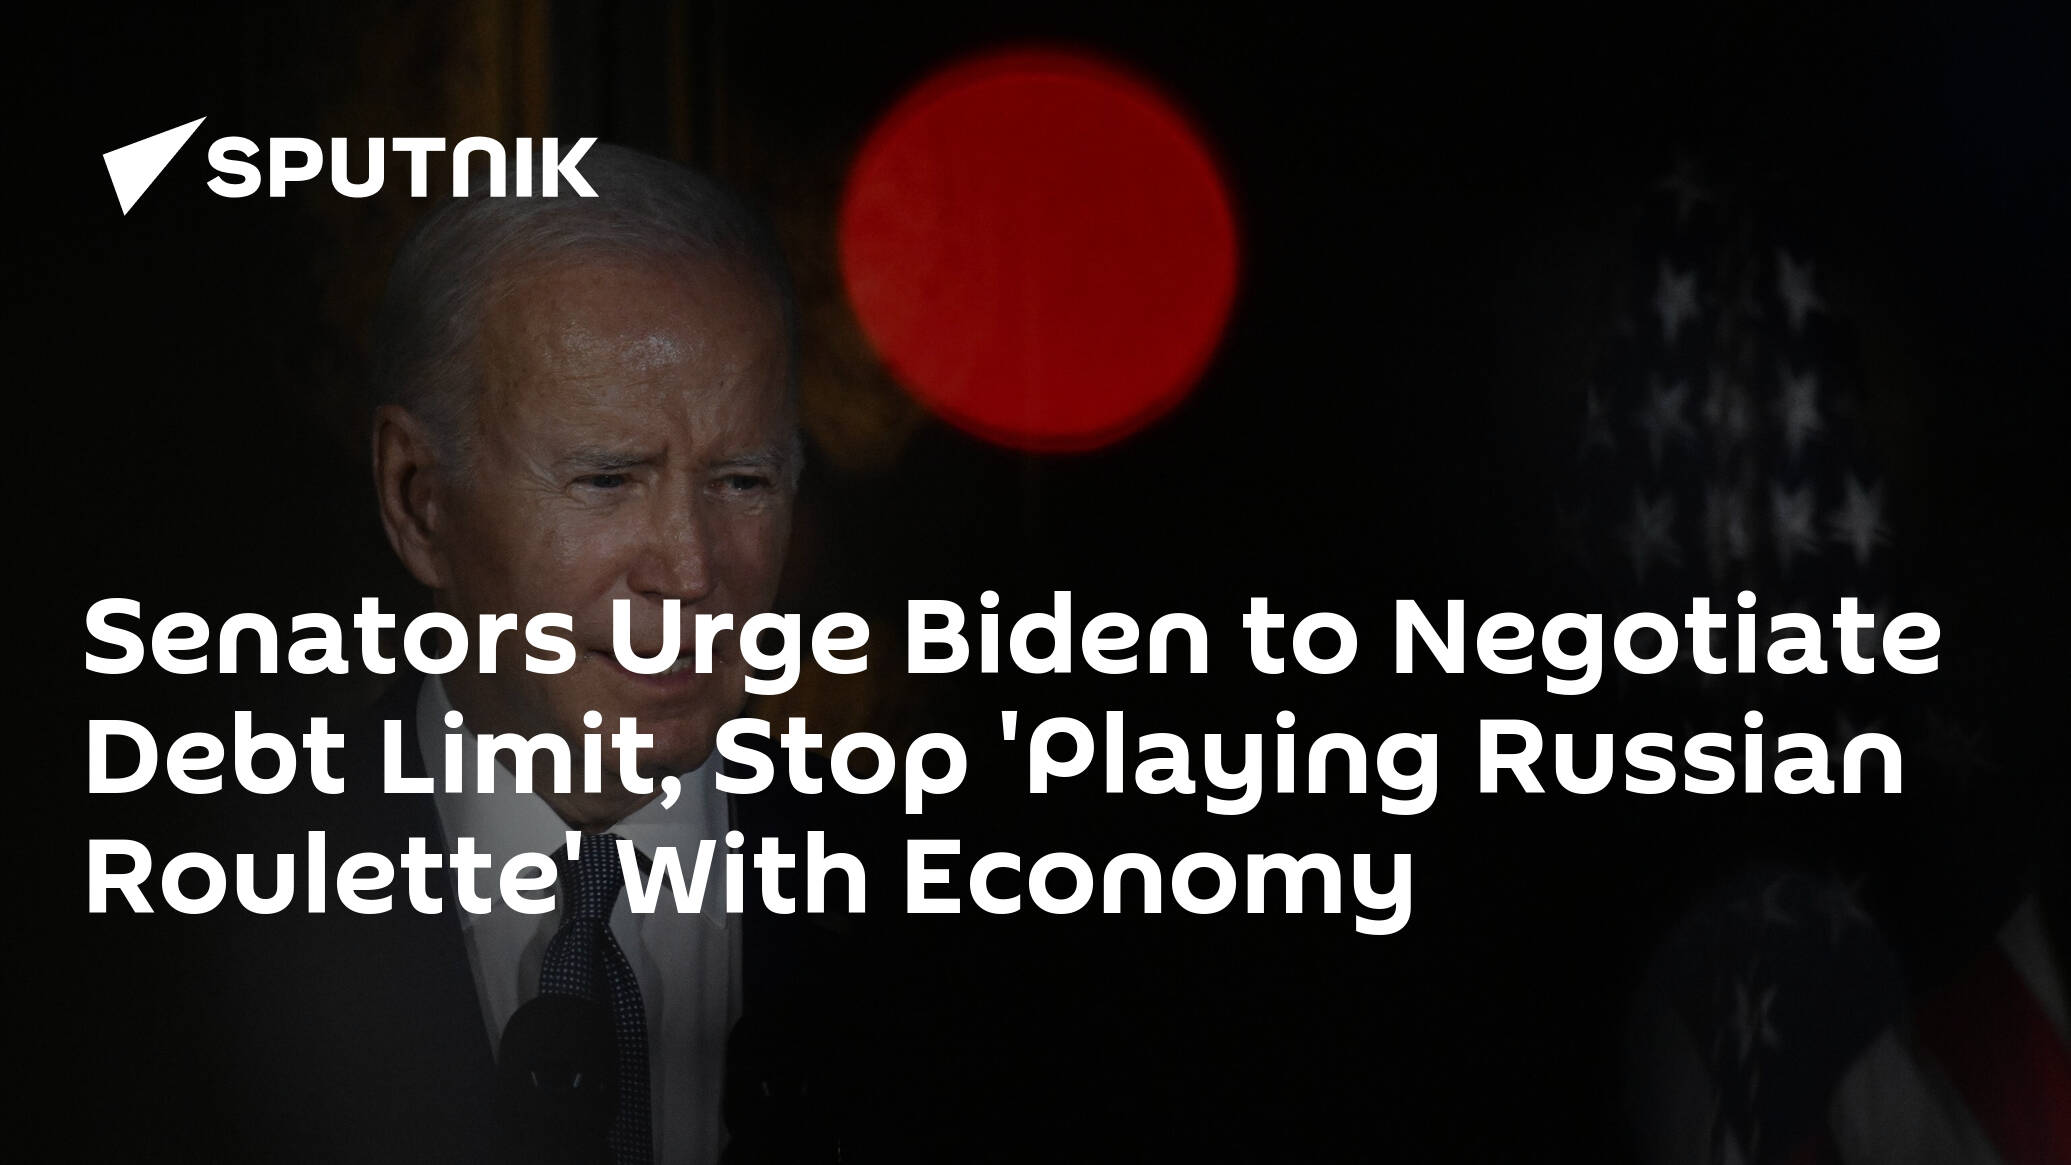 Senators Urge Biden to Negotiate Debt Limit, Stop 'Playing Russian Roulette' With Economy